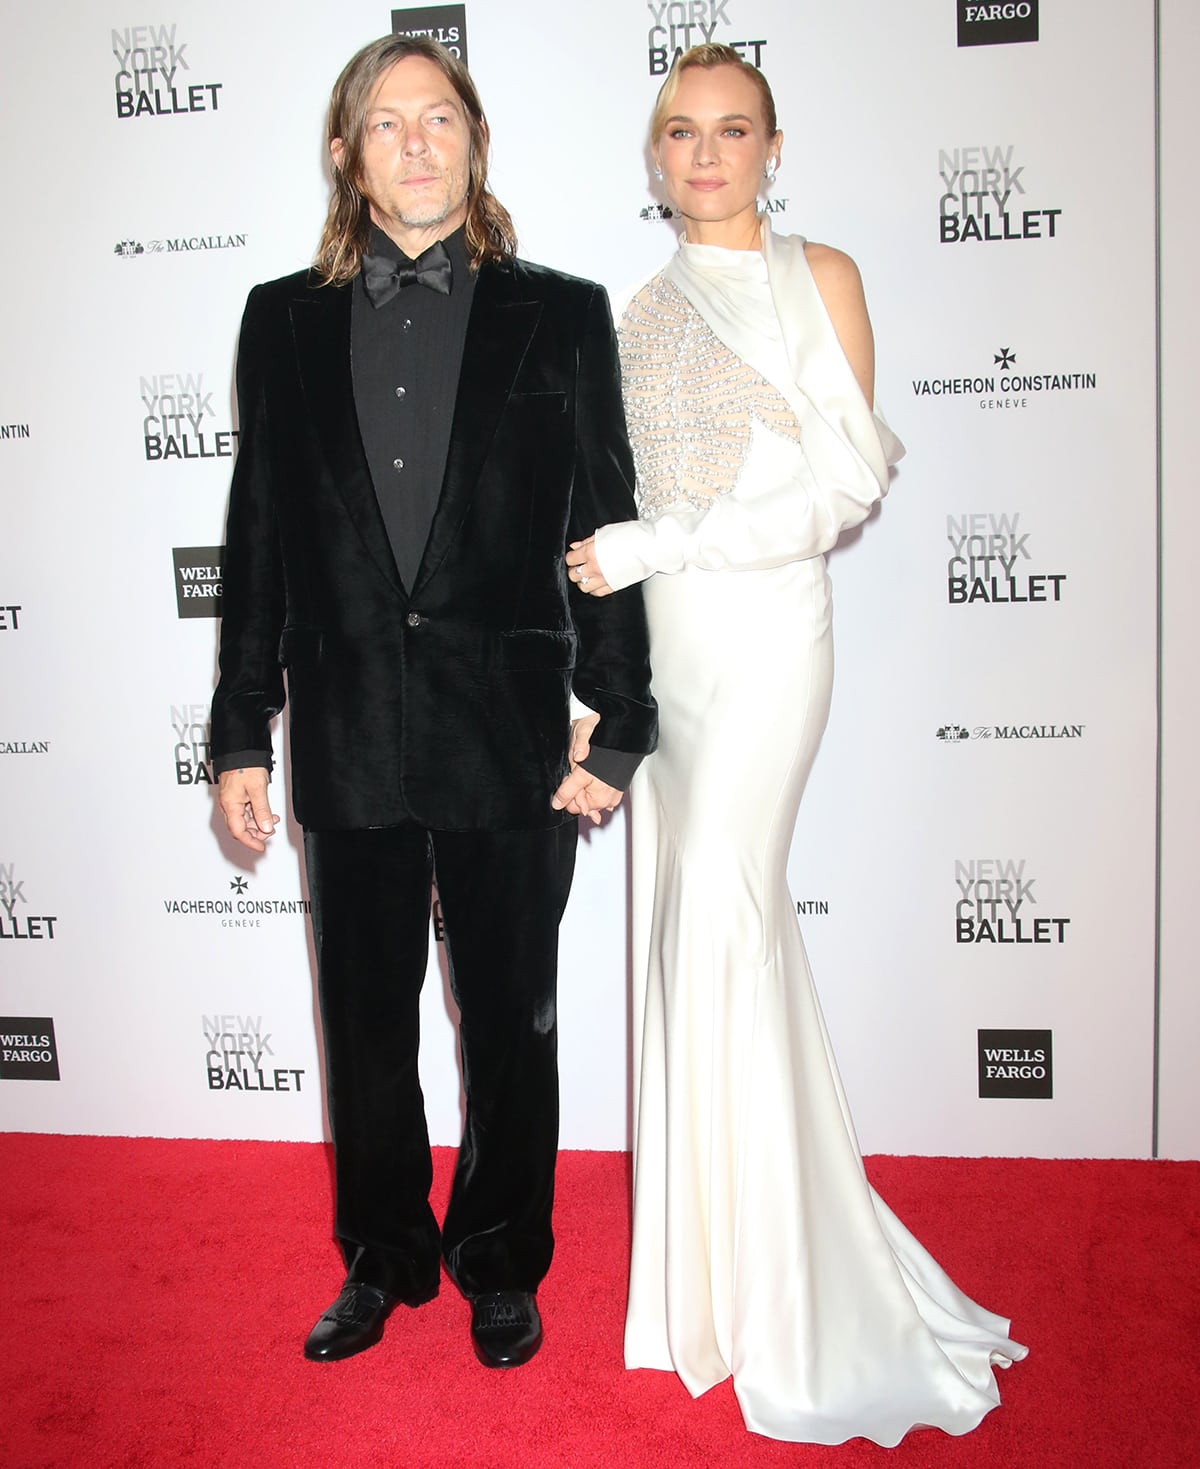 Norman Reedus and Diane Kruger first met in 2015 and got engaged in 2021